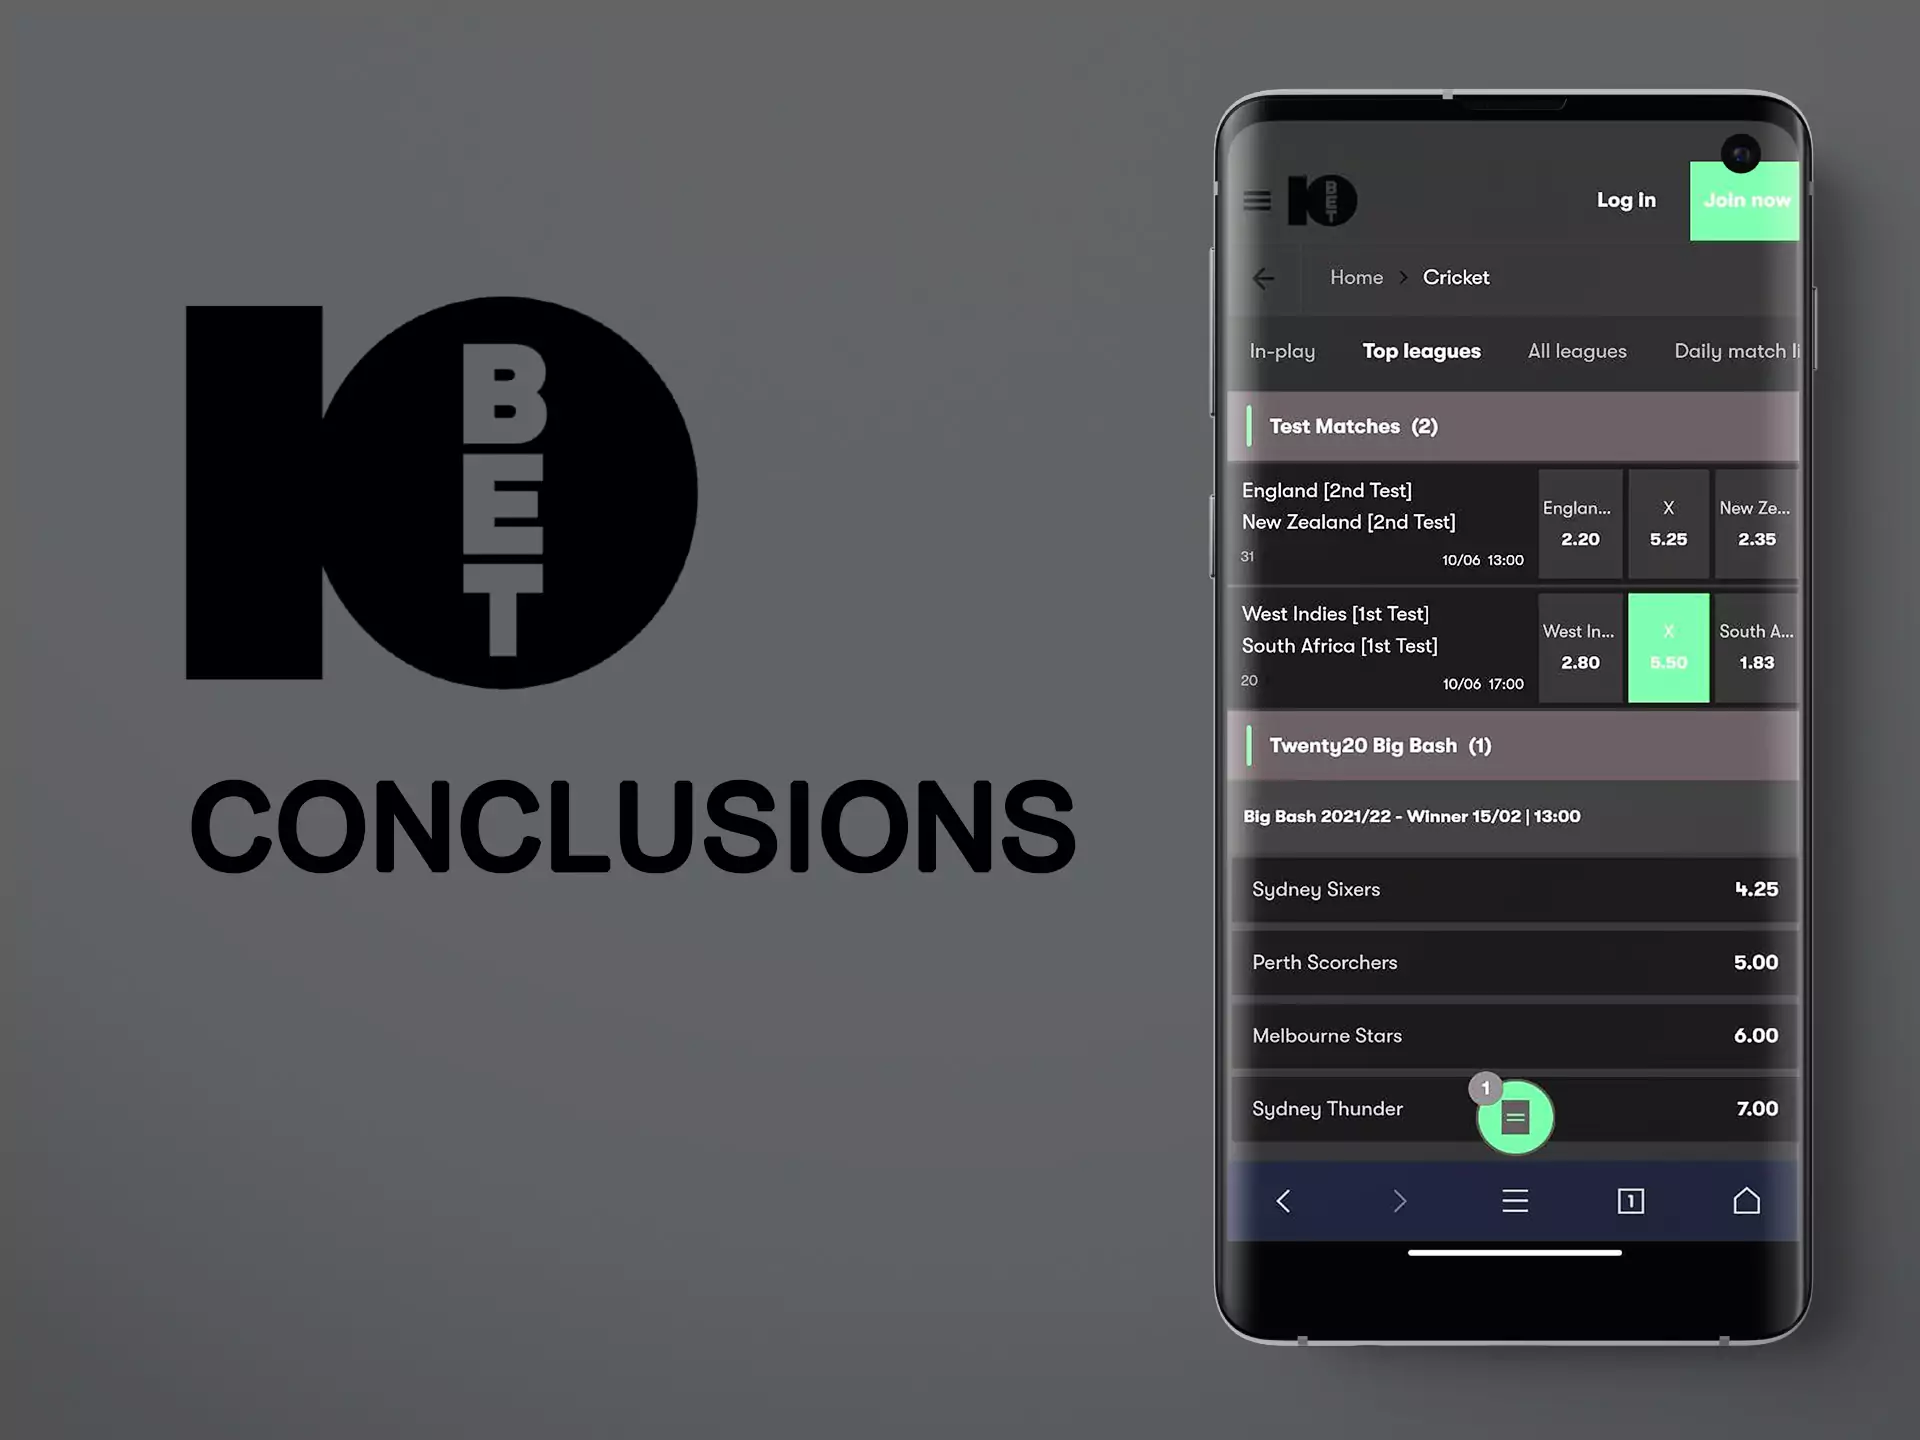 Read about the main benefits of the 10Bet mobile app in our conclusions.